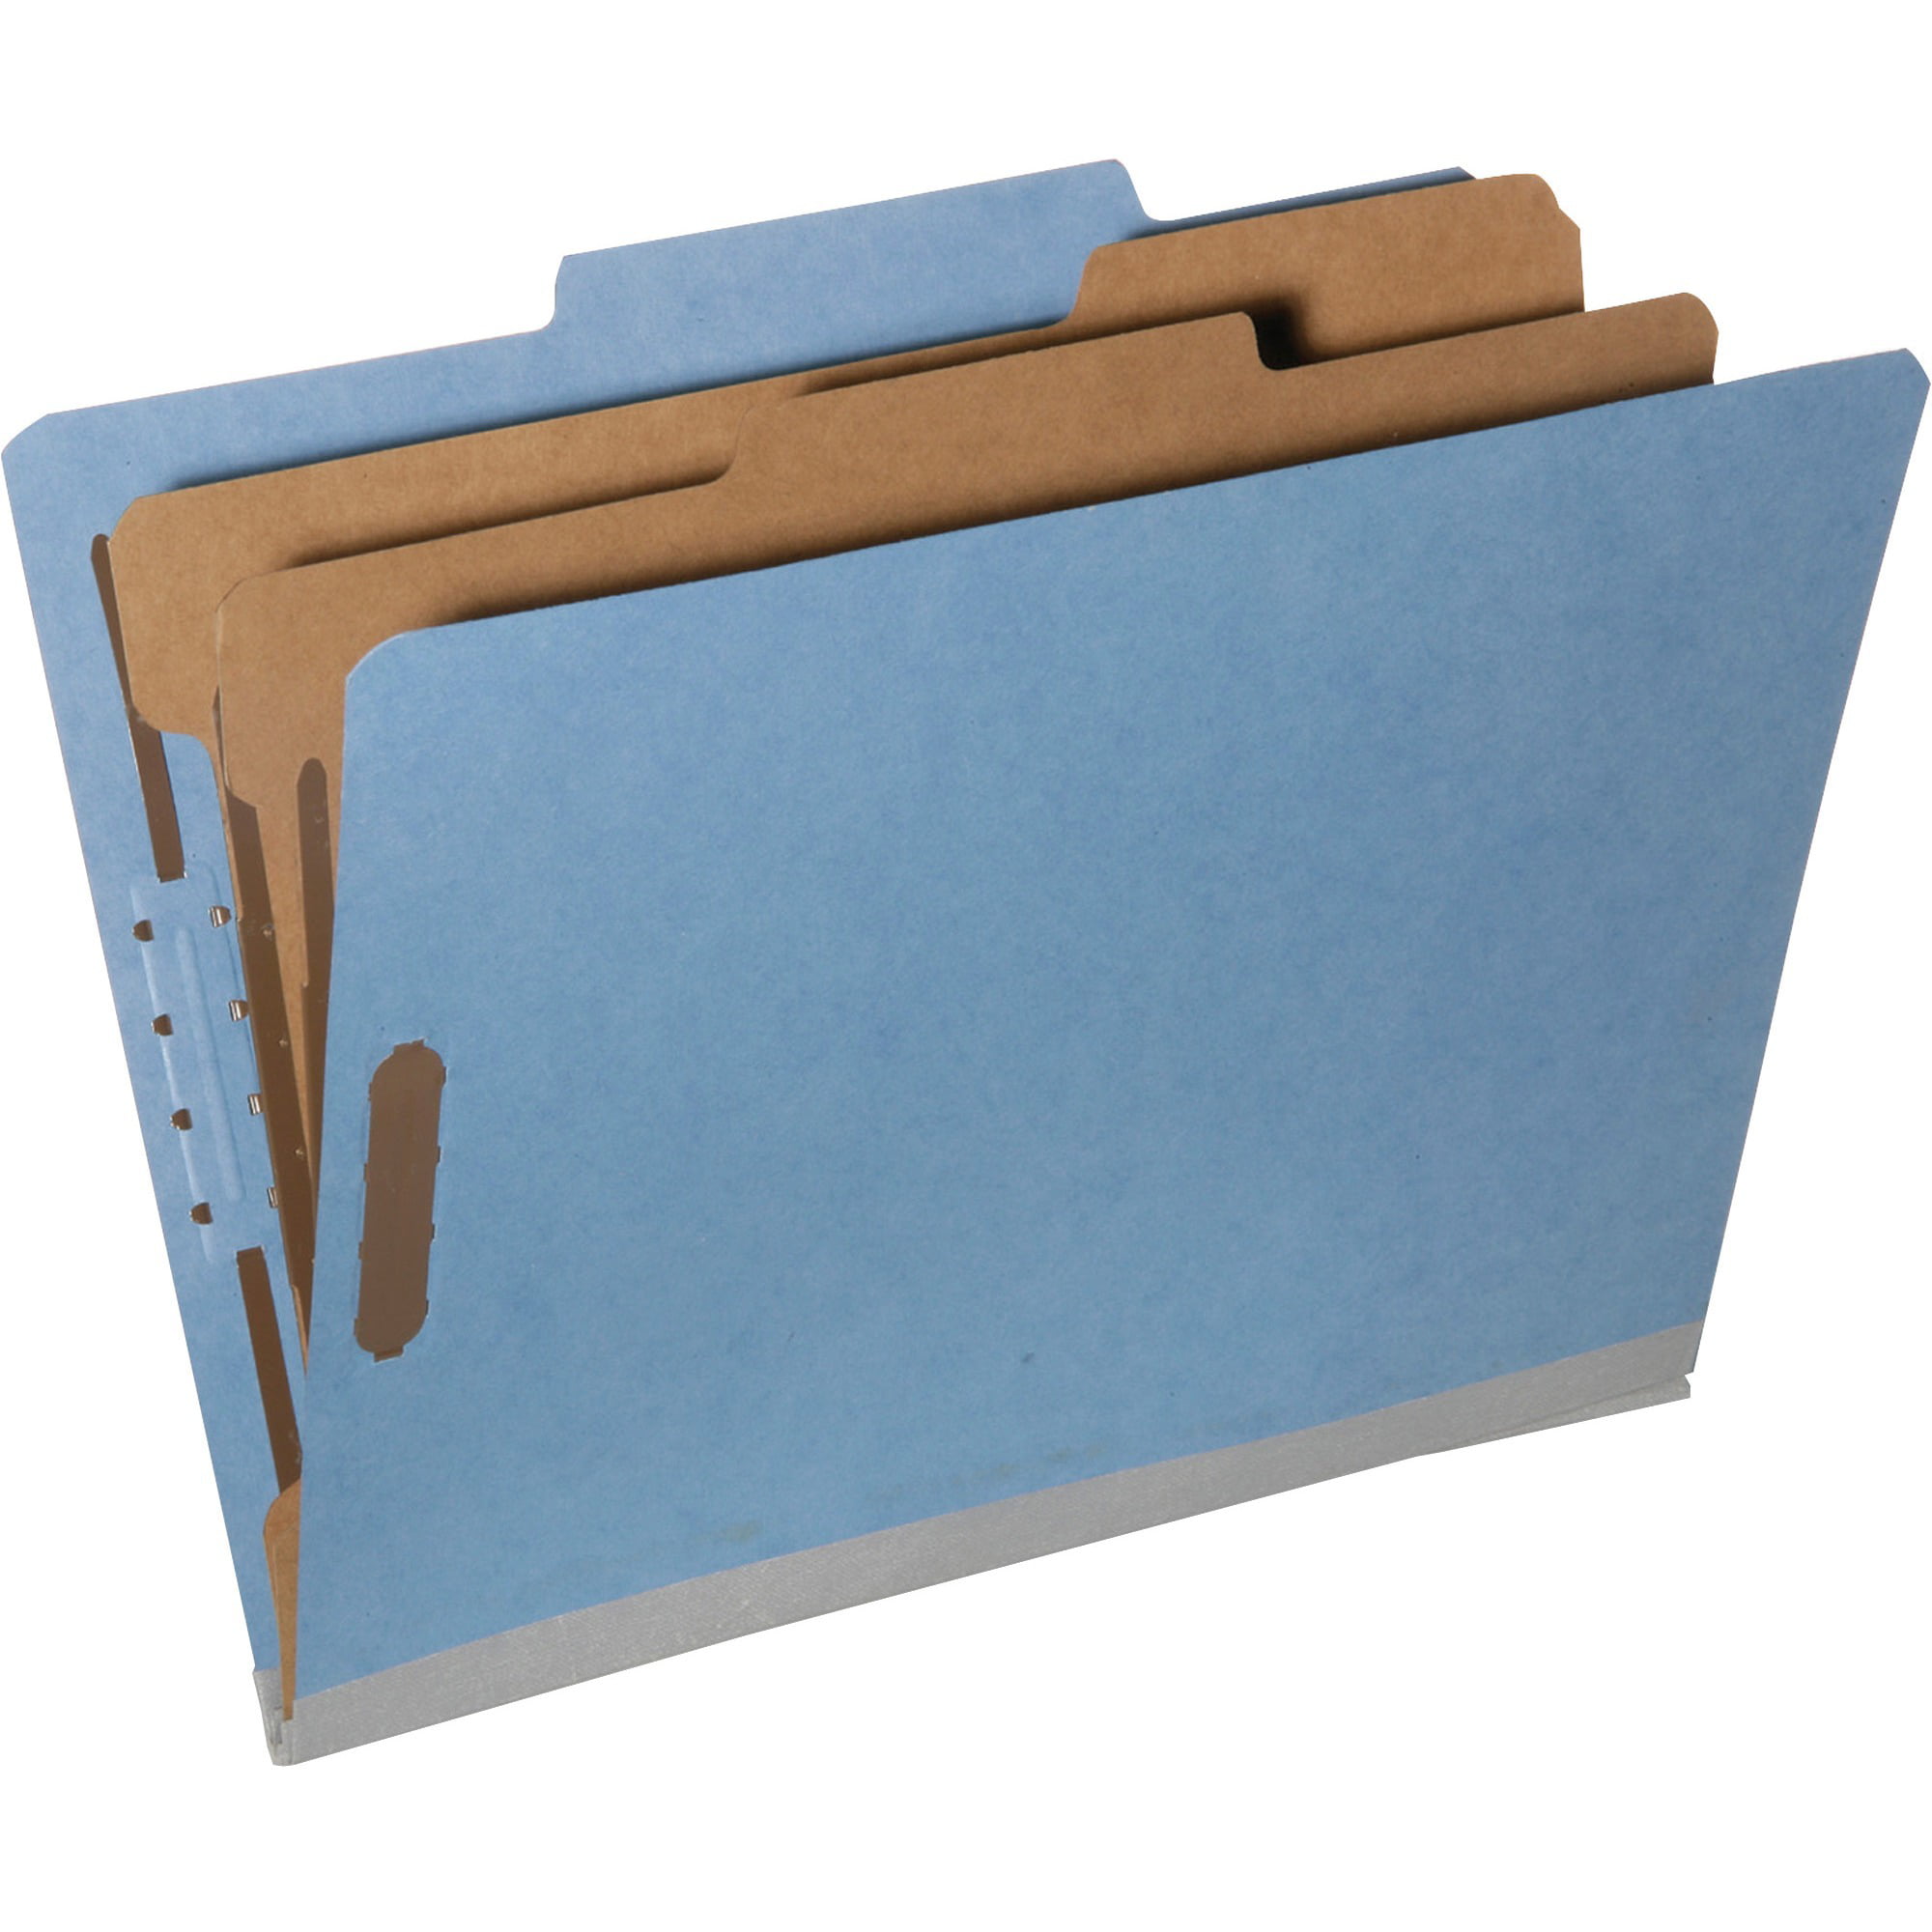 6 Sections File Folder w/ 2” Expansion for Letter Size Paper 2 Prongs Pressboard Organizer for Law Client Files Pack of 10 Classification Folders w/ 2 Dividers Medical Files Green Office Reports 